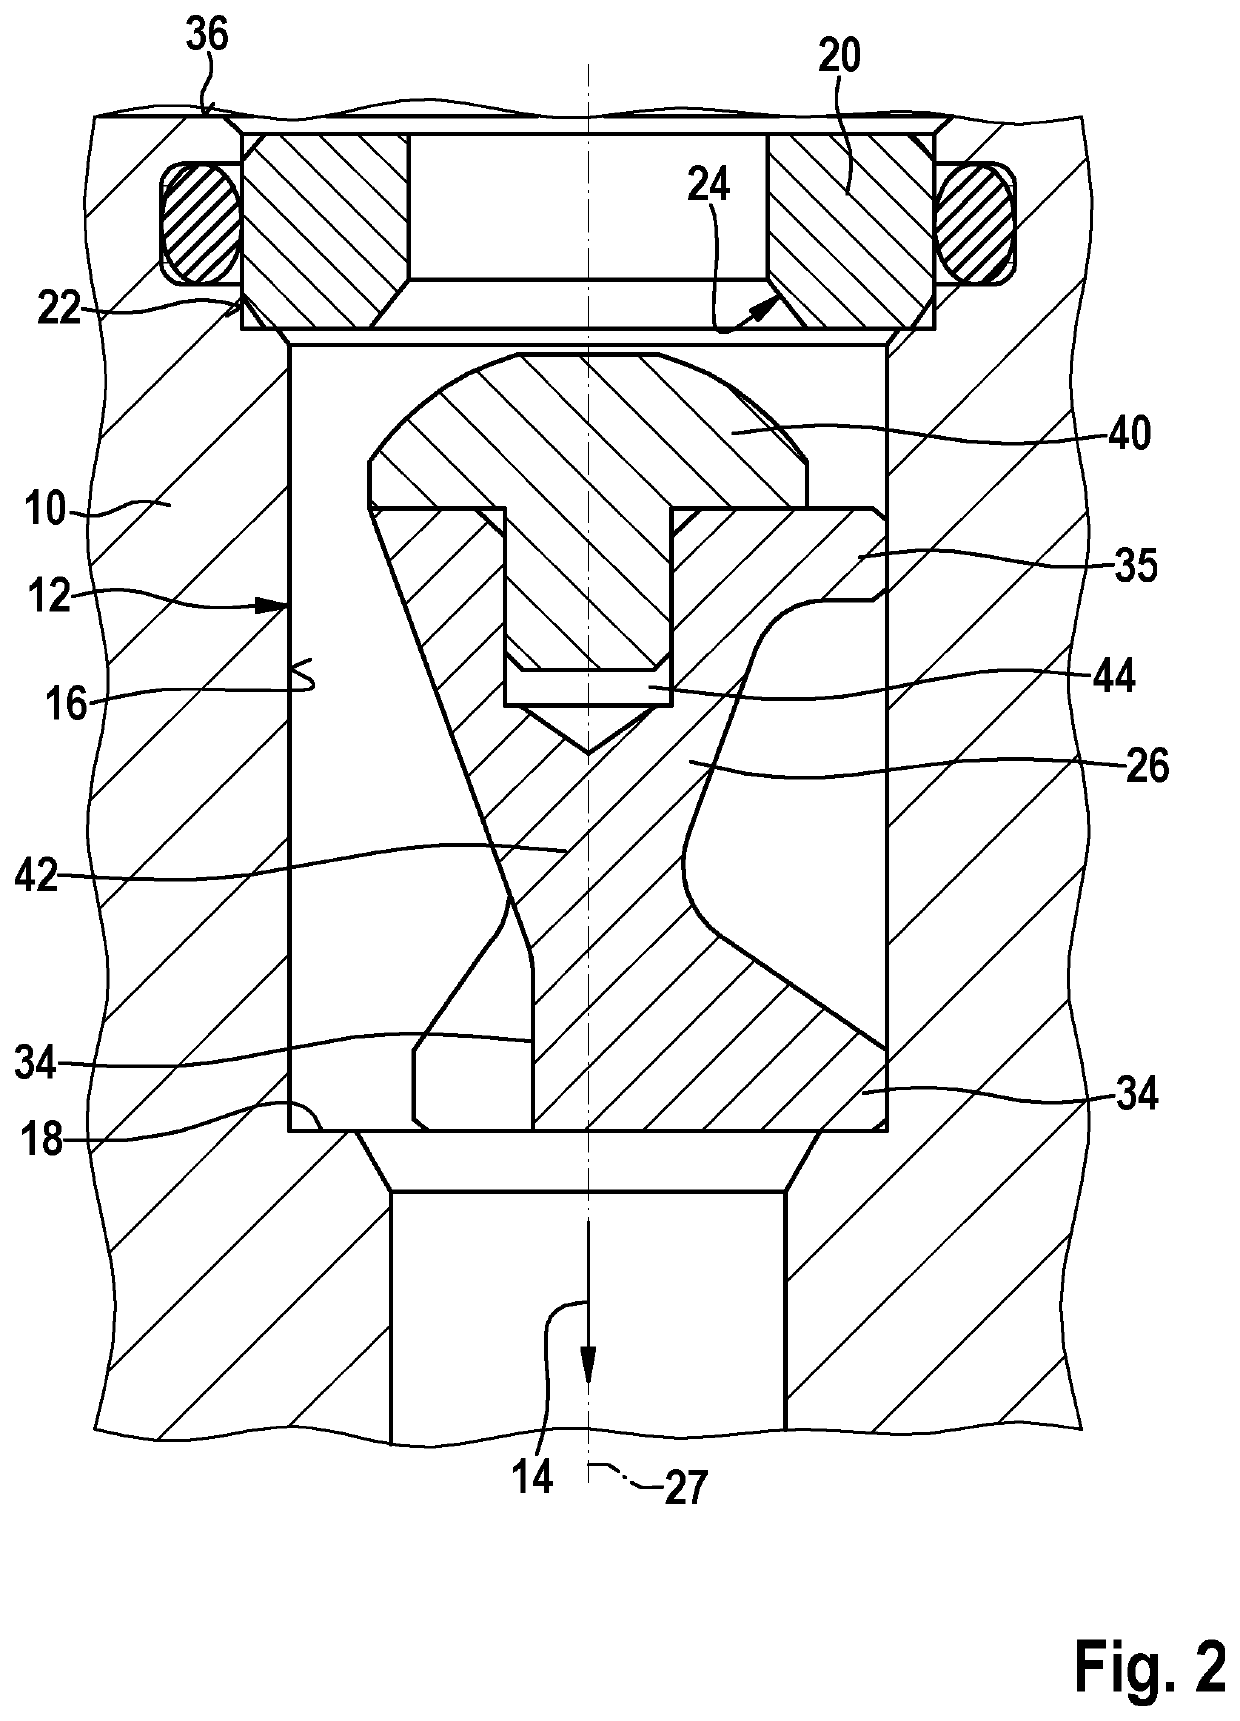 Hydraulic block and manufacturing method for a hydraulic block including at least one check valve